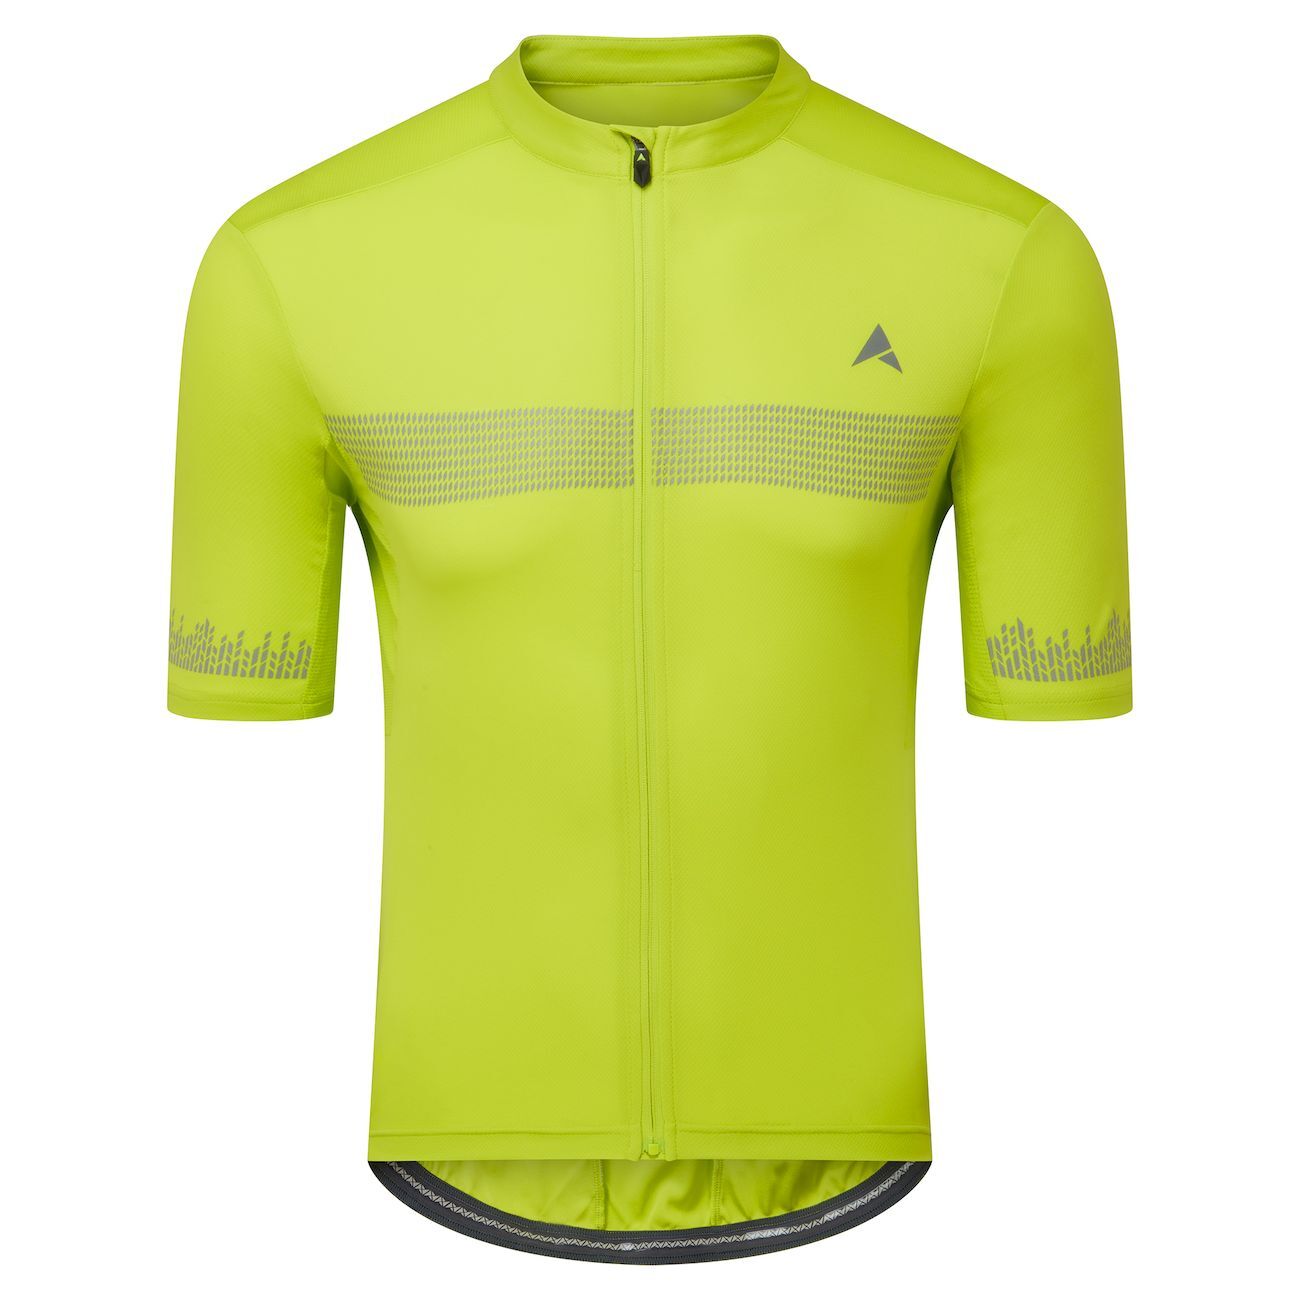 Altura Maillot Manches Courtes Nightvision - Maillot ciclismo